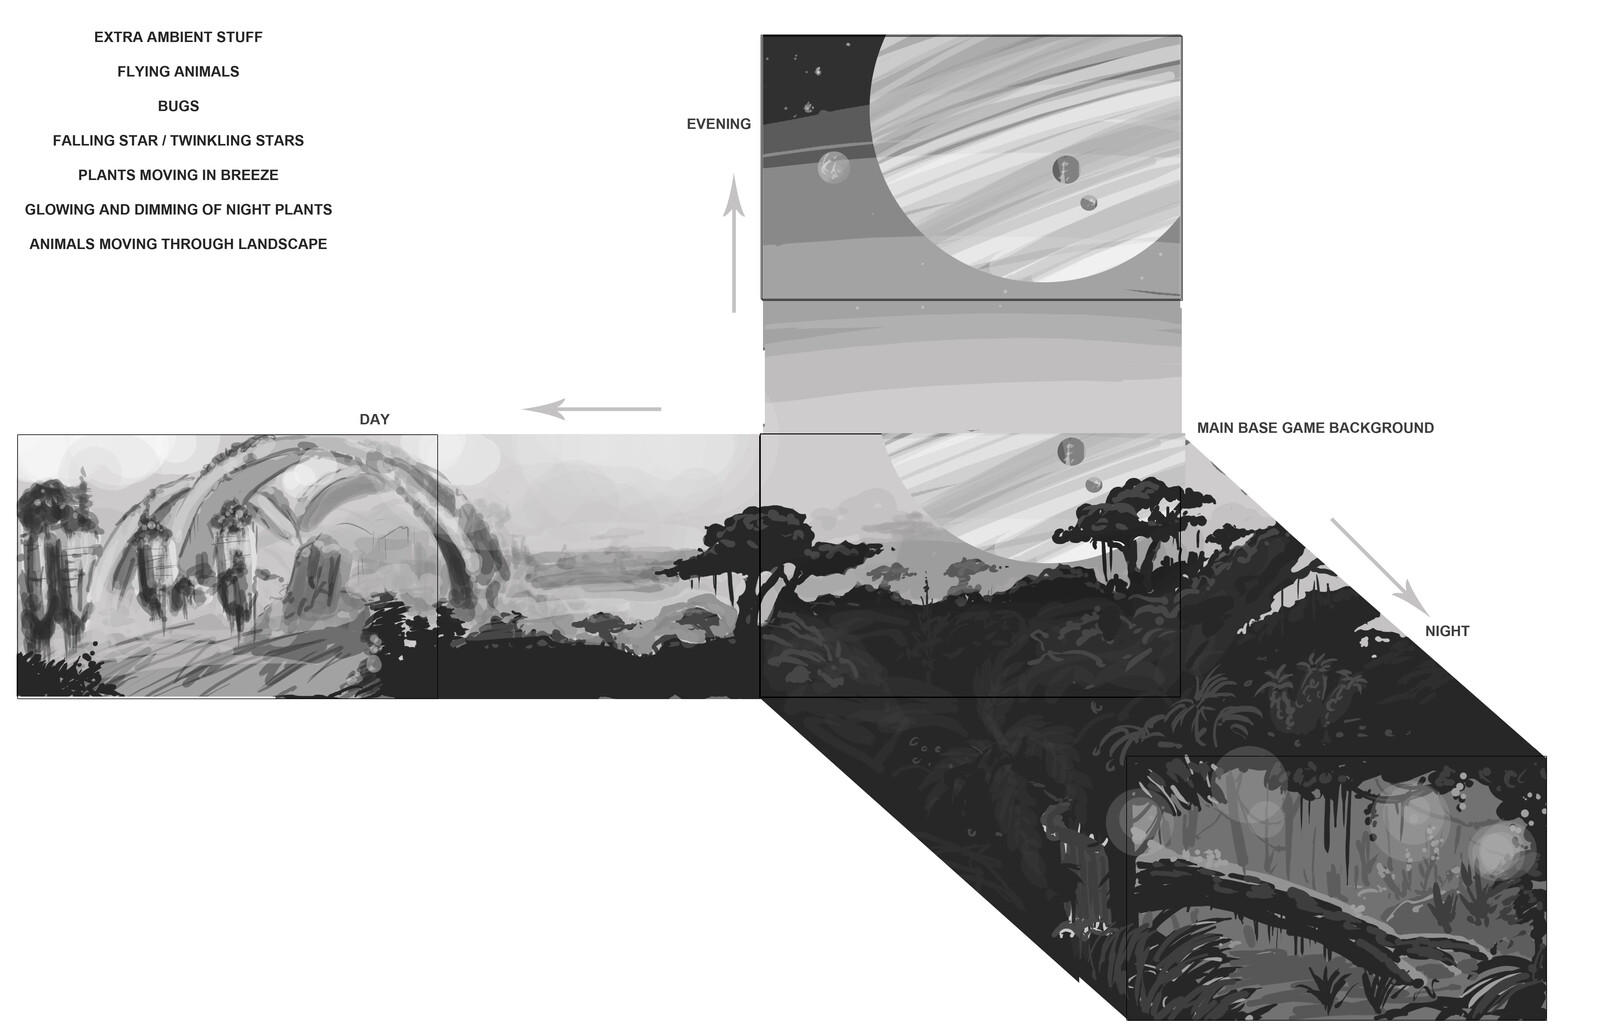 Storyboard for 3D artists building game screen transitions. The background of the Player's screen would pan to the different regions of Pandora depending on which bonus was awarded.